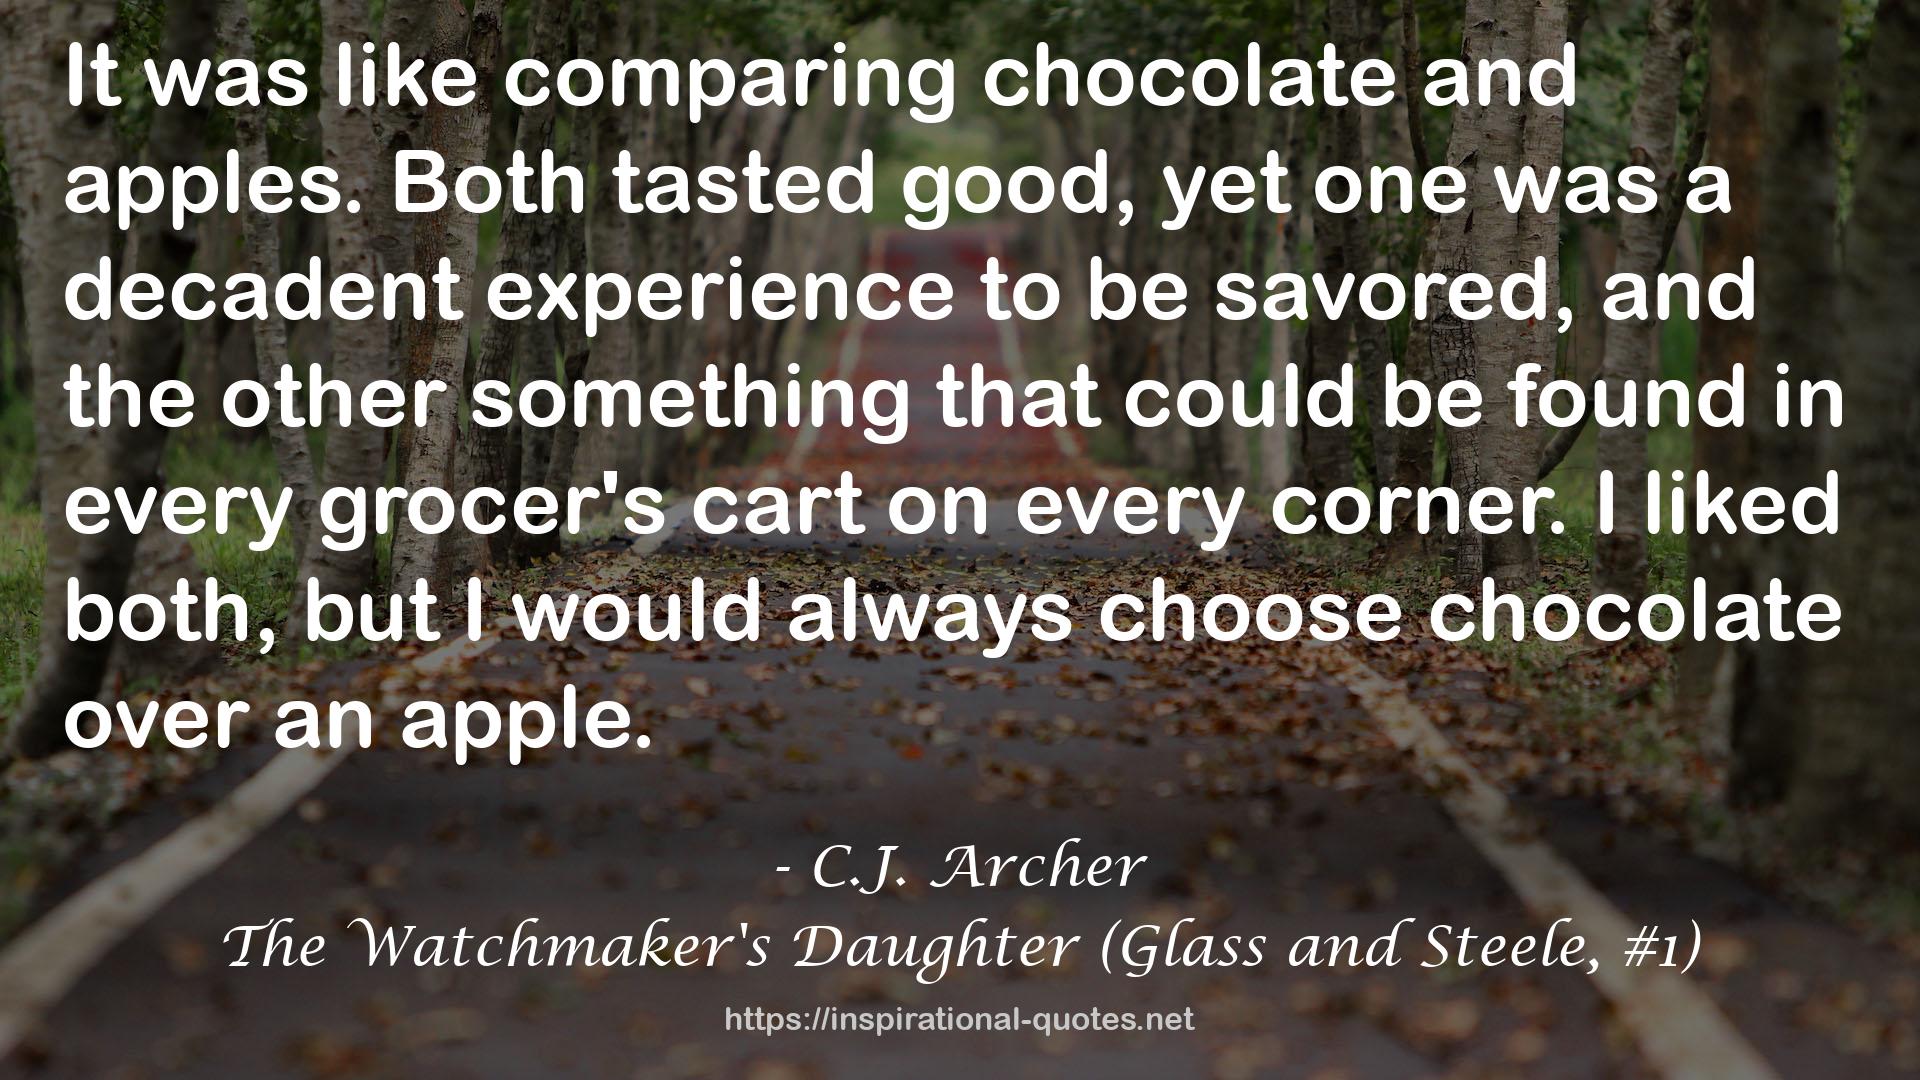 The Watchmaker's Daughter (Glass and Steele, #1) QUOTES